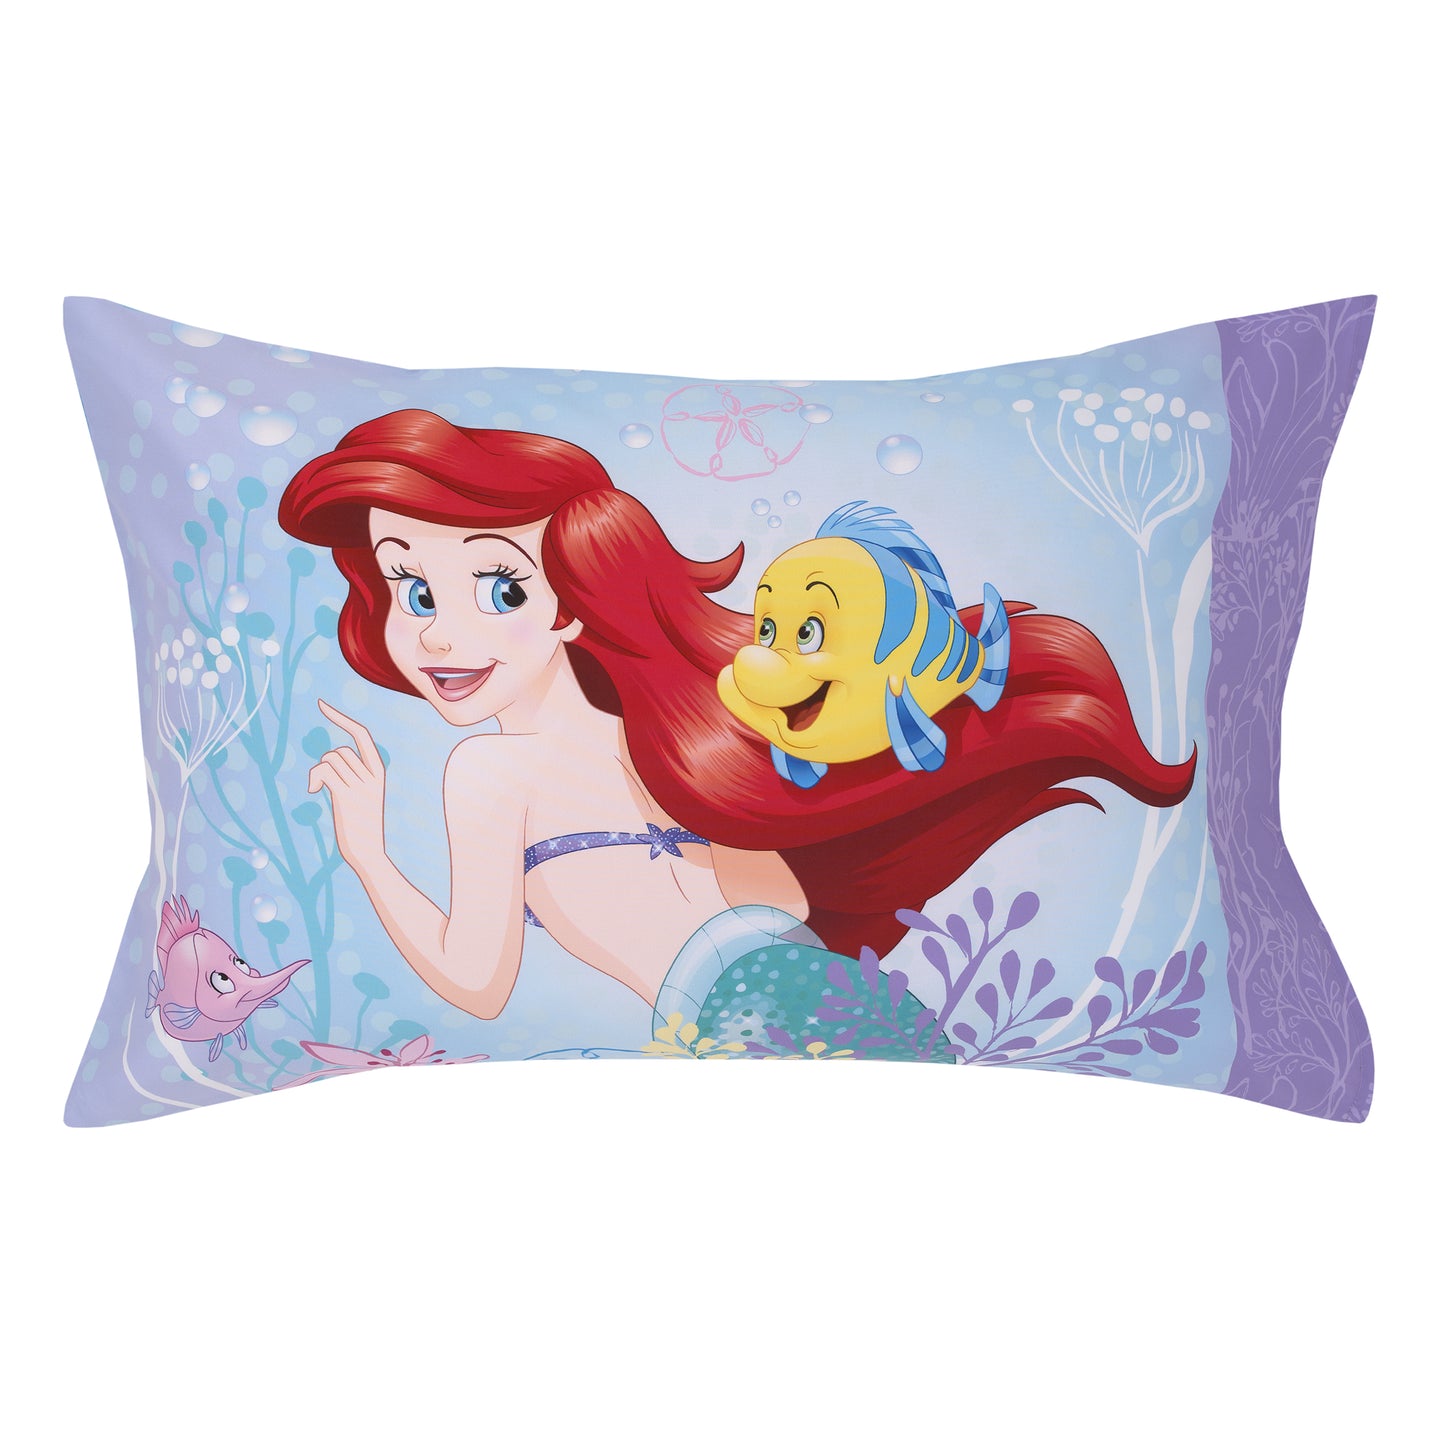 Disney The Little Mermaid Be Fearless Aqua, Lavender, and Orange Ariel 4 Piece Toddler Bed Set - Comforter, Fitted Bottom Sheet, Flat Top Sheet, and Reversible Pillowcase